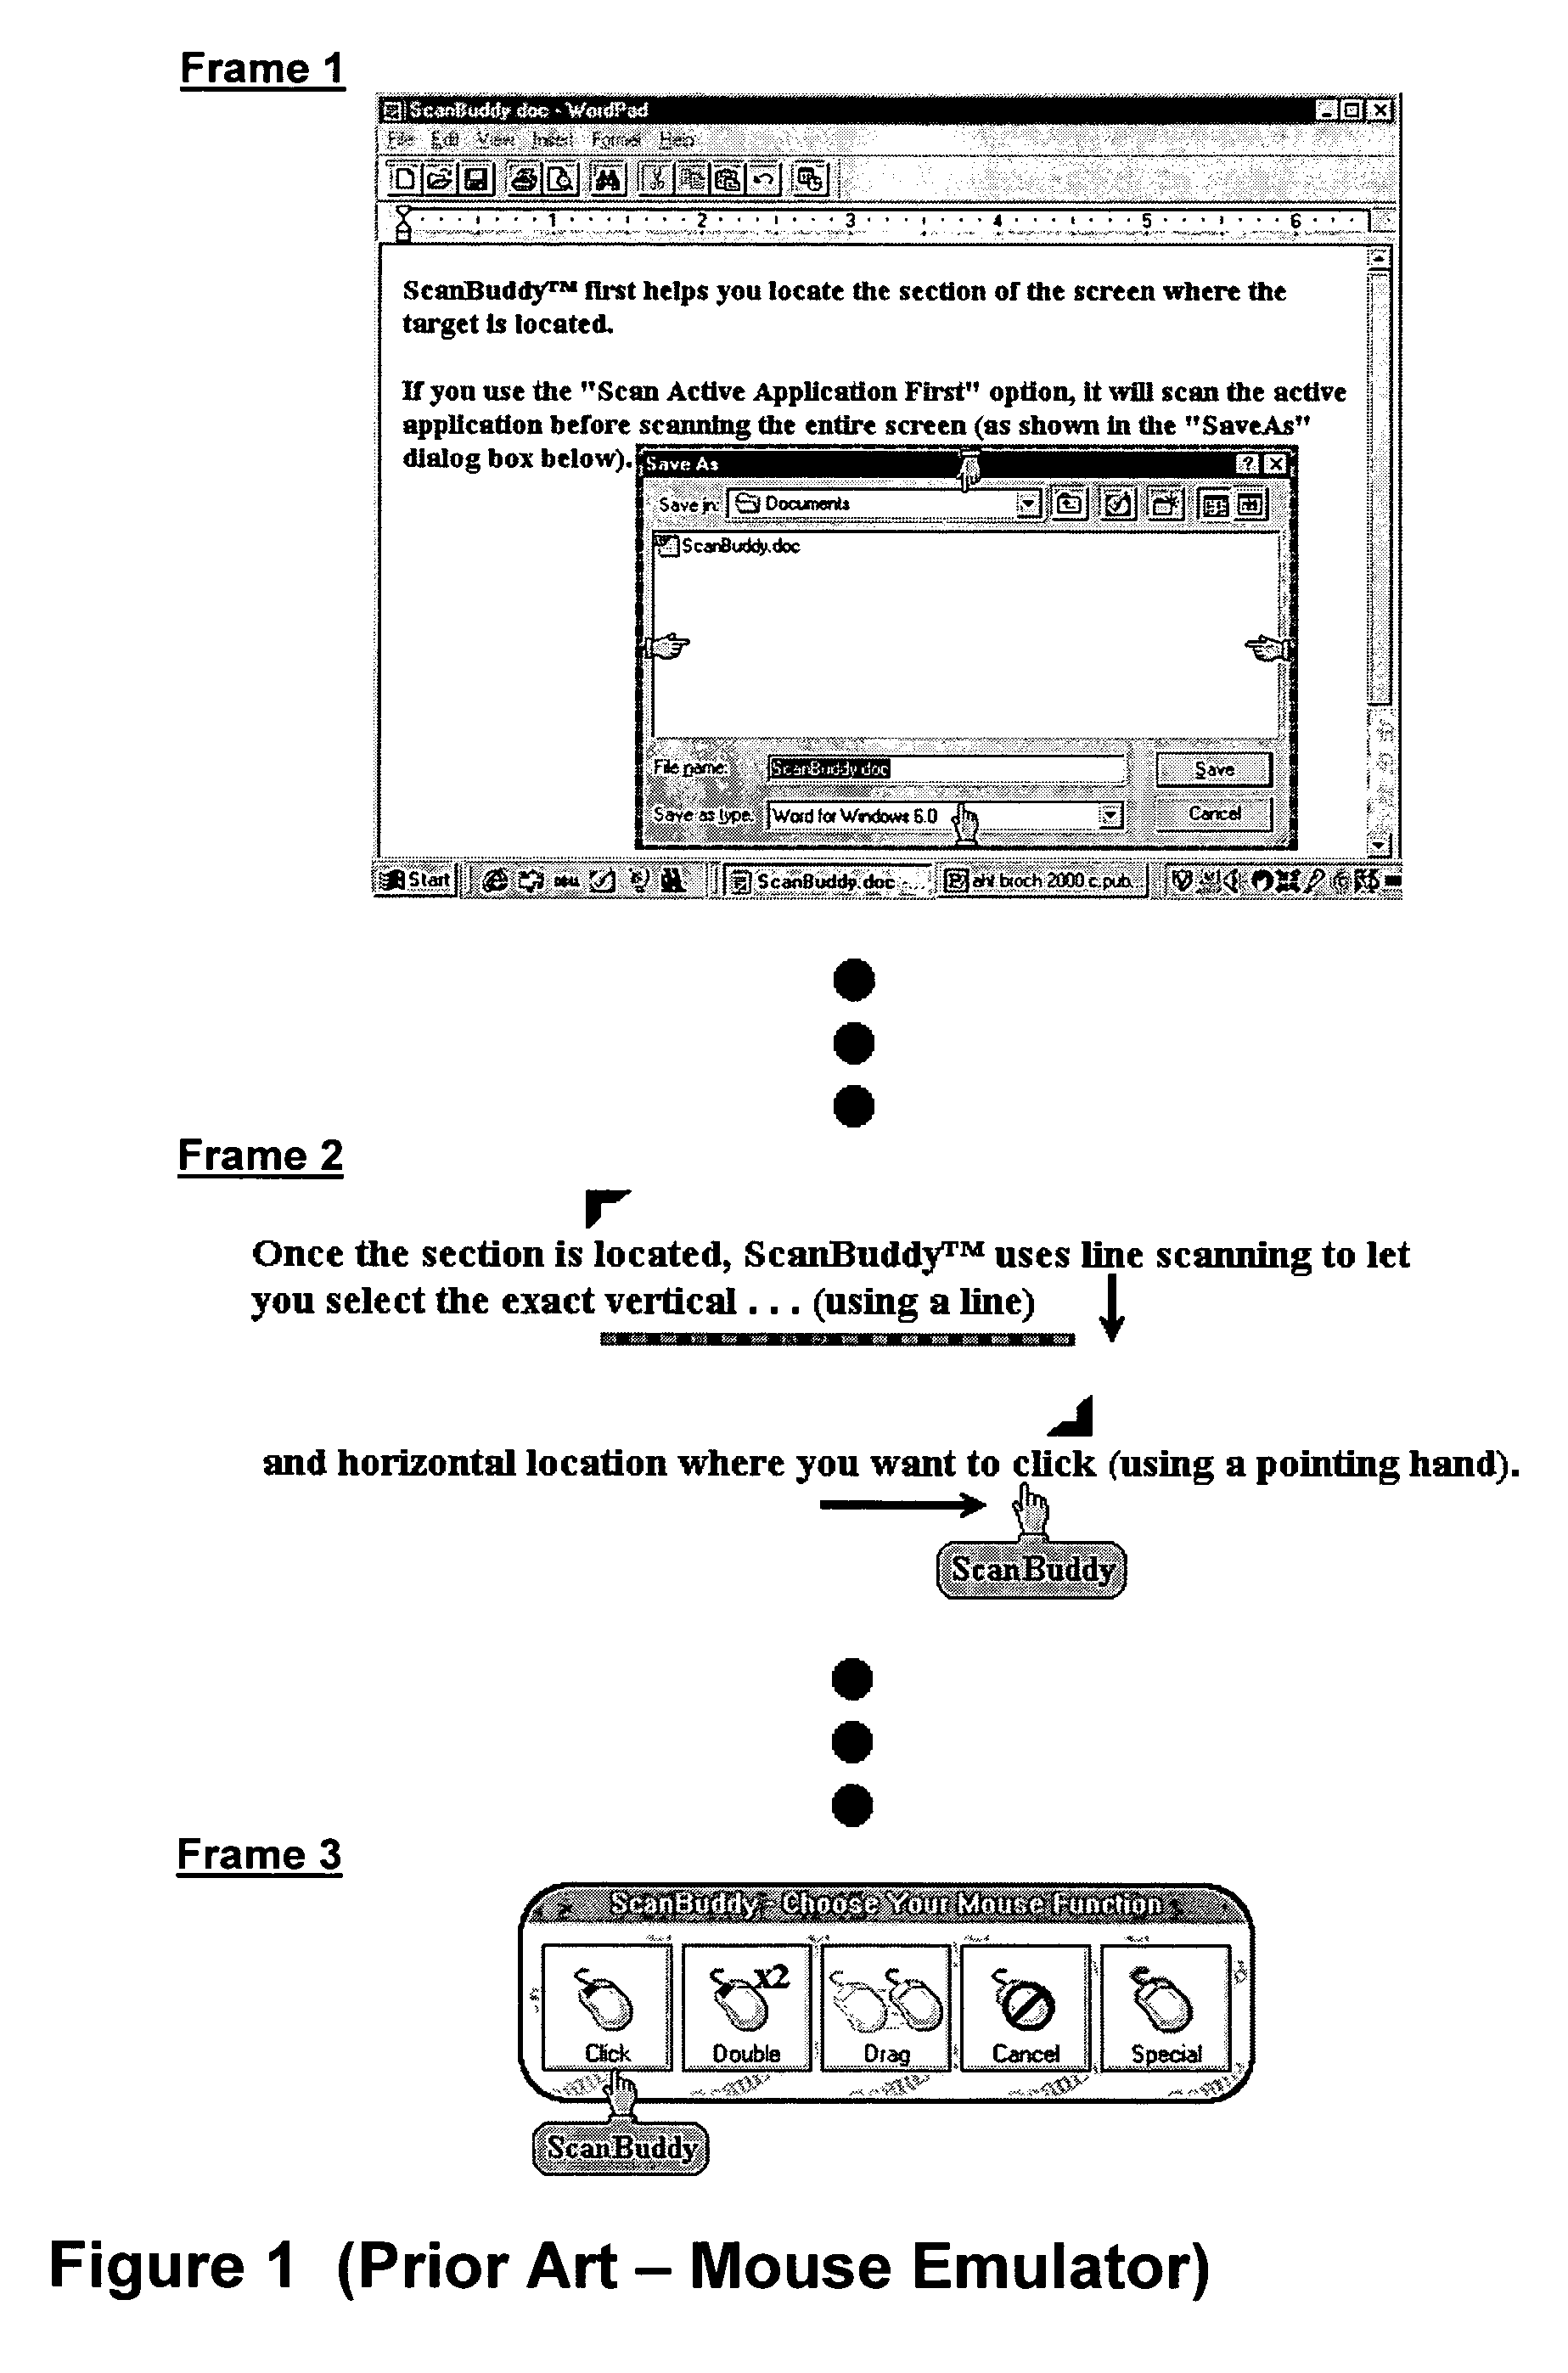 Process and apparatus for providing a one-dimensional computer input interface allowing movement in one or two directions to conduct pointer operations usually performed with a mouse and character input usually performed with a keyboard